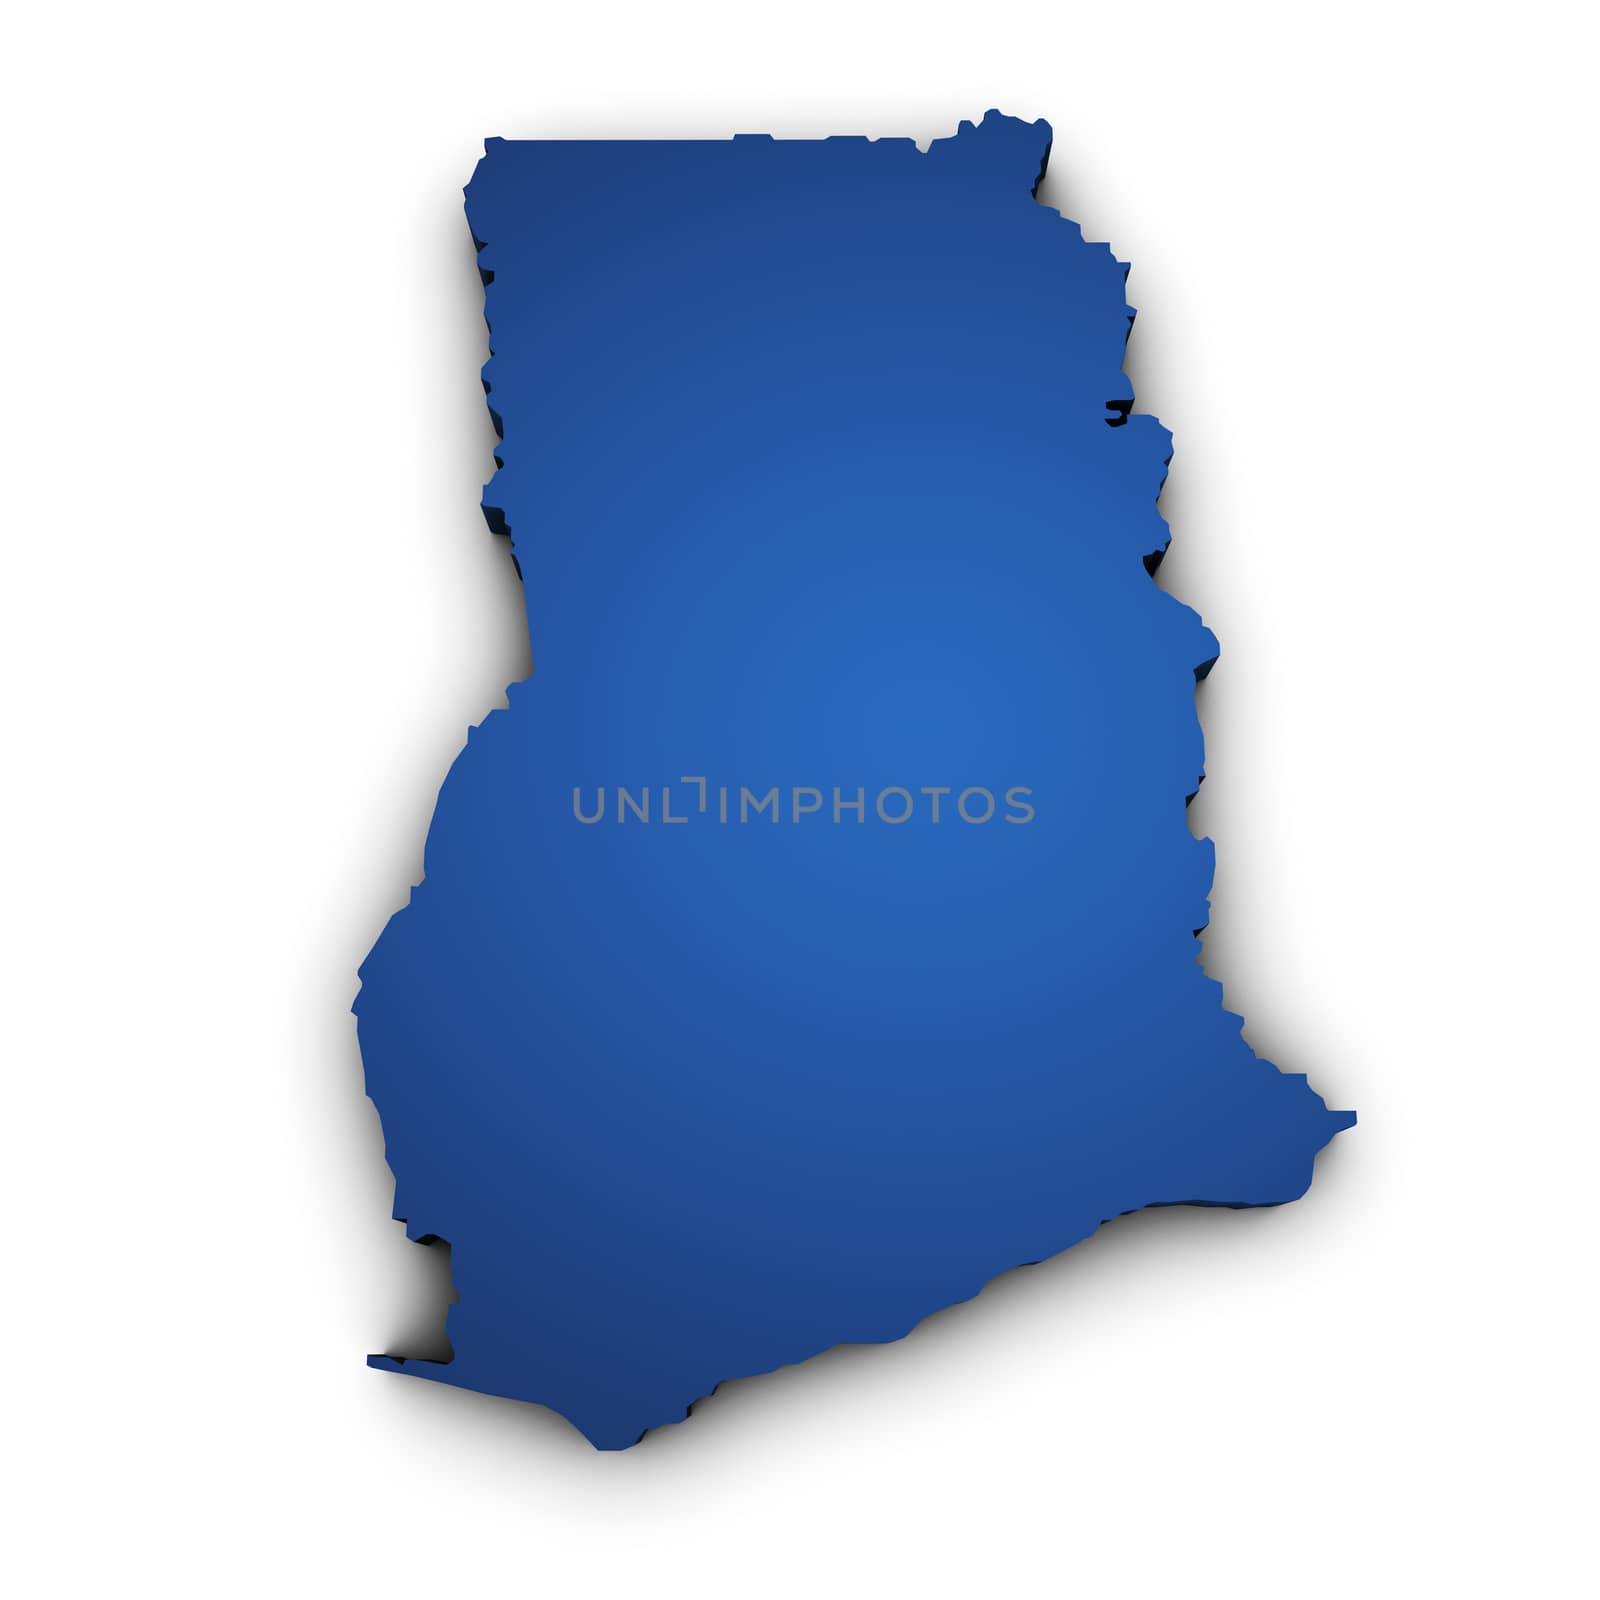 Shape 3d of Ghana map colored in blue and isolated on white background.